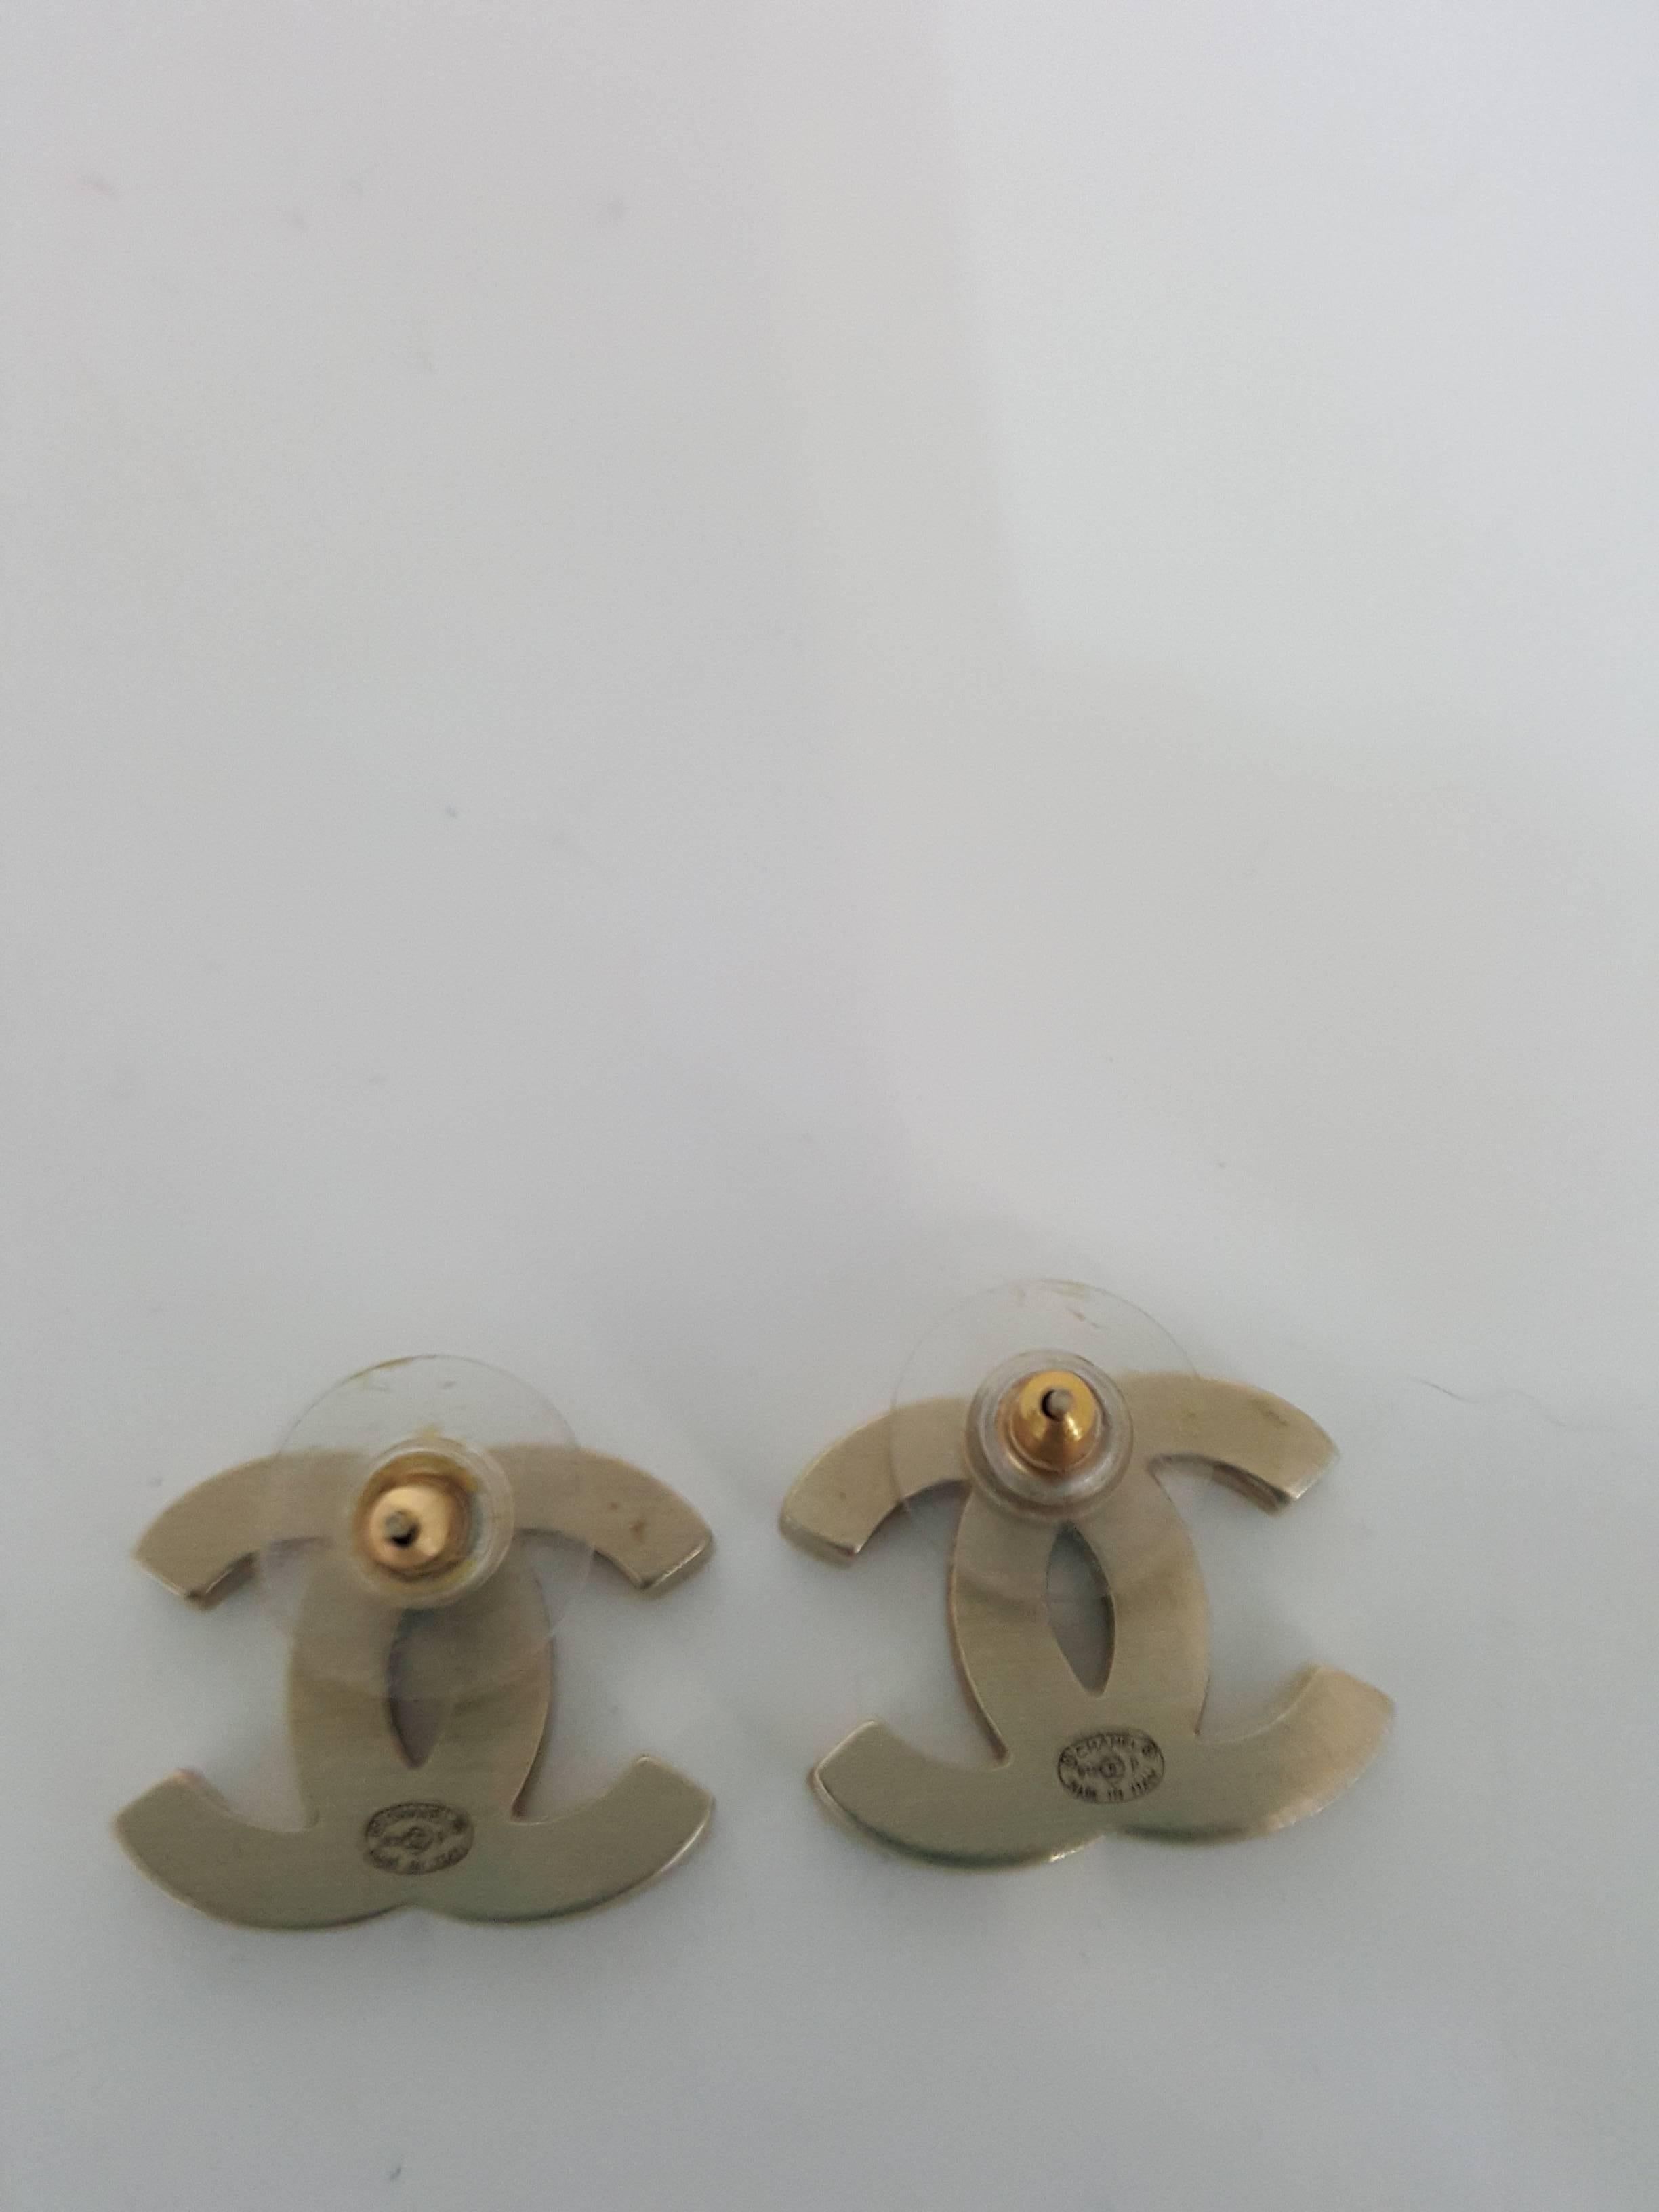 Offered for sale are these iconic Chanel pierced earrings,  They are soft gold metal with black enamel and are pieced.  They are 3/4